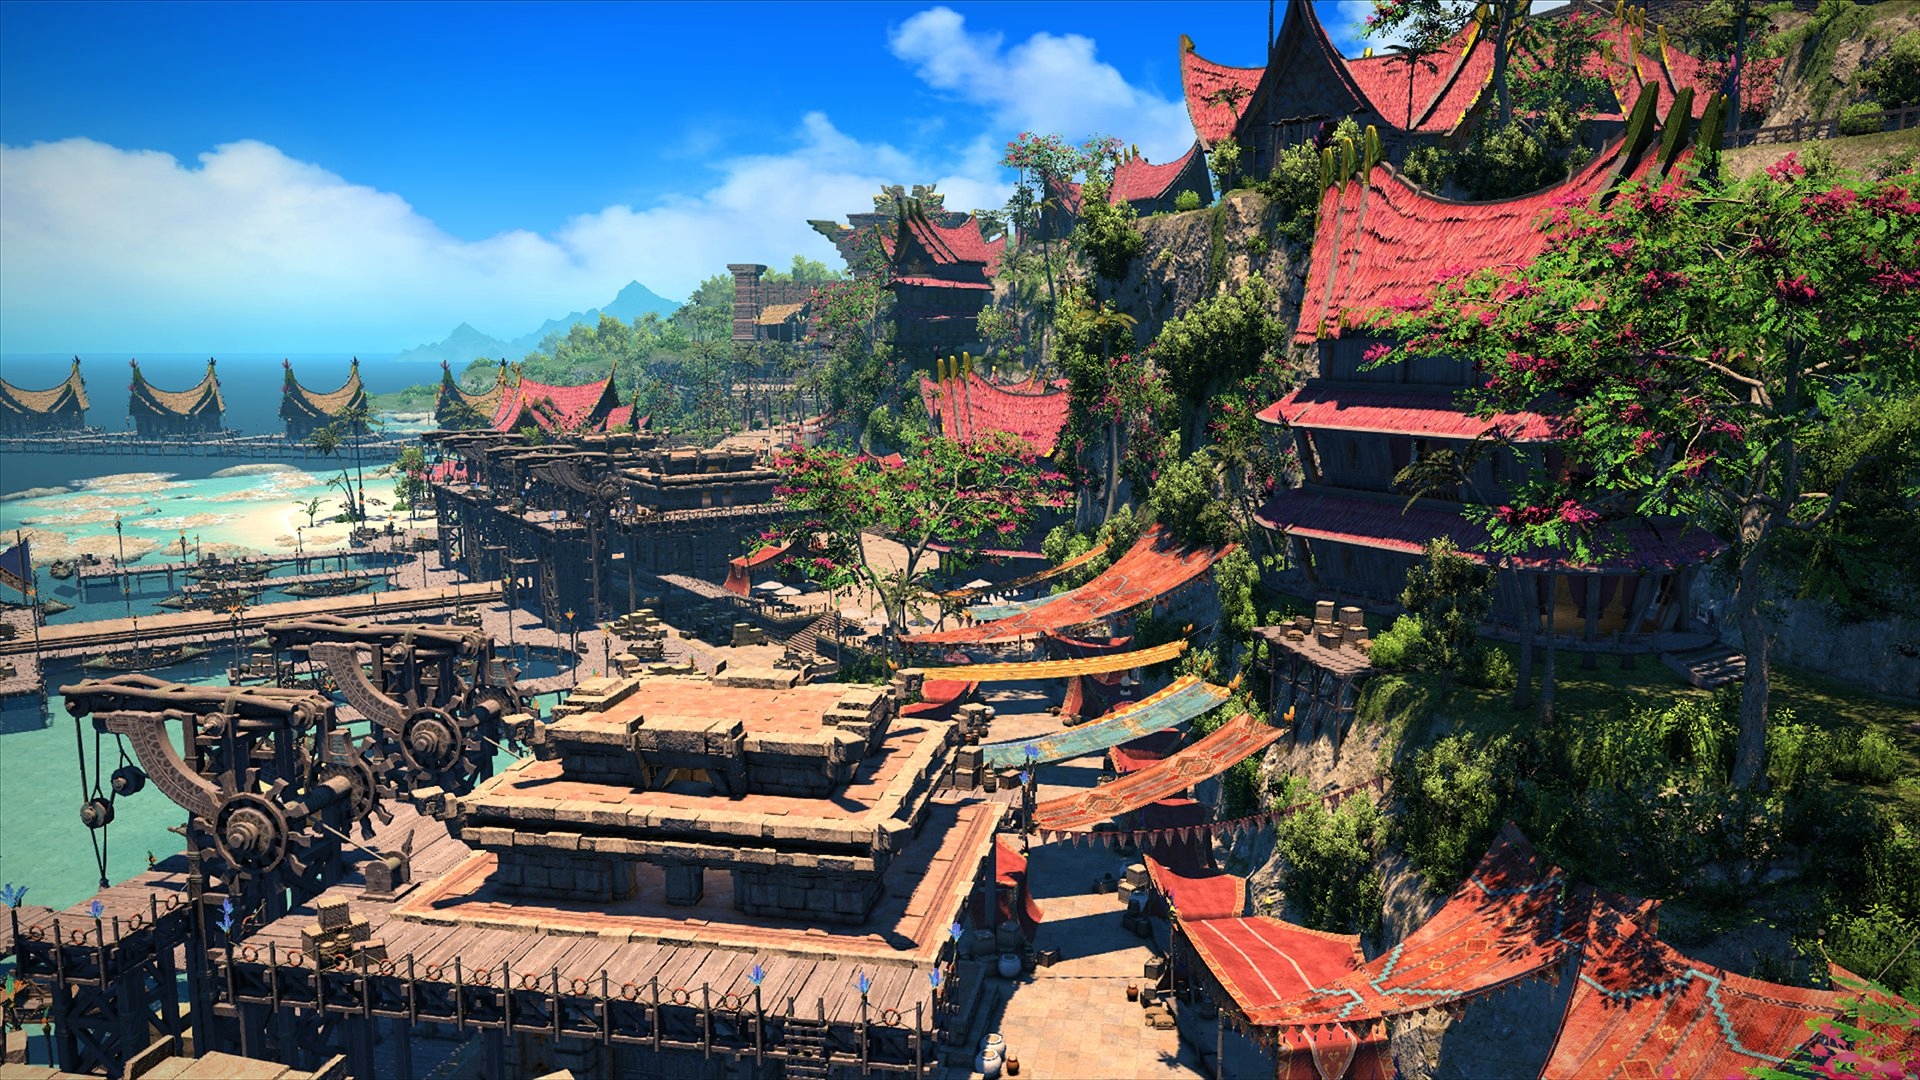 A new area from FFXIV featuring buildings among forest trees and a blue, cloudy sky